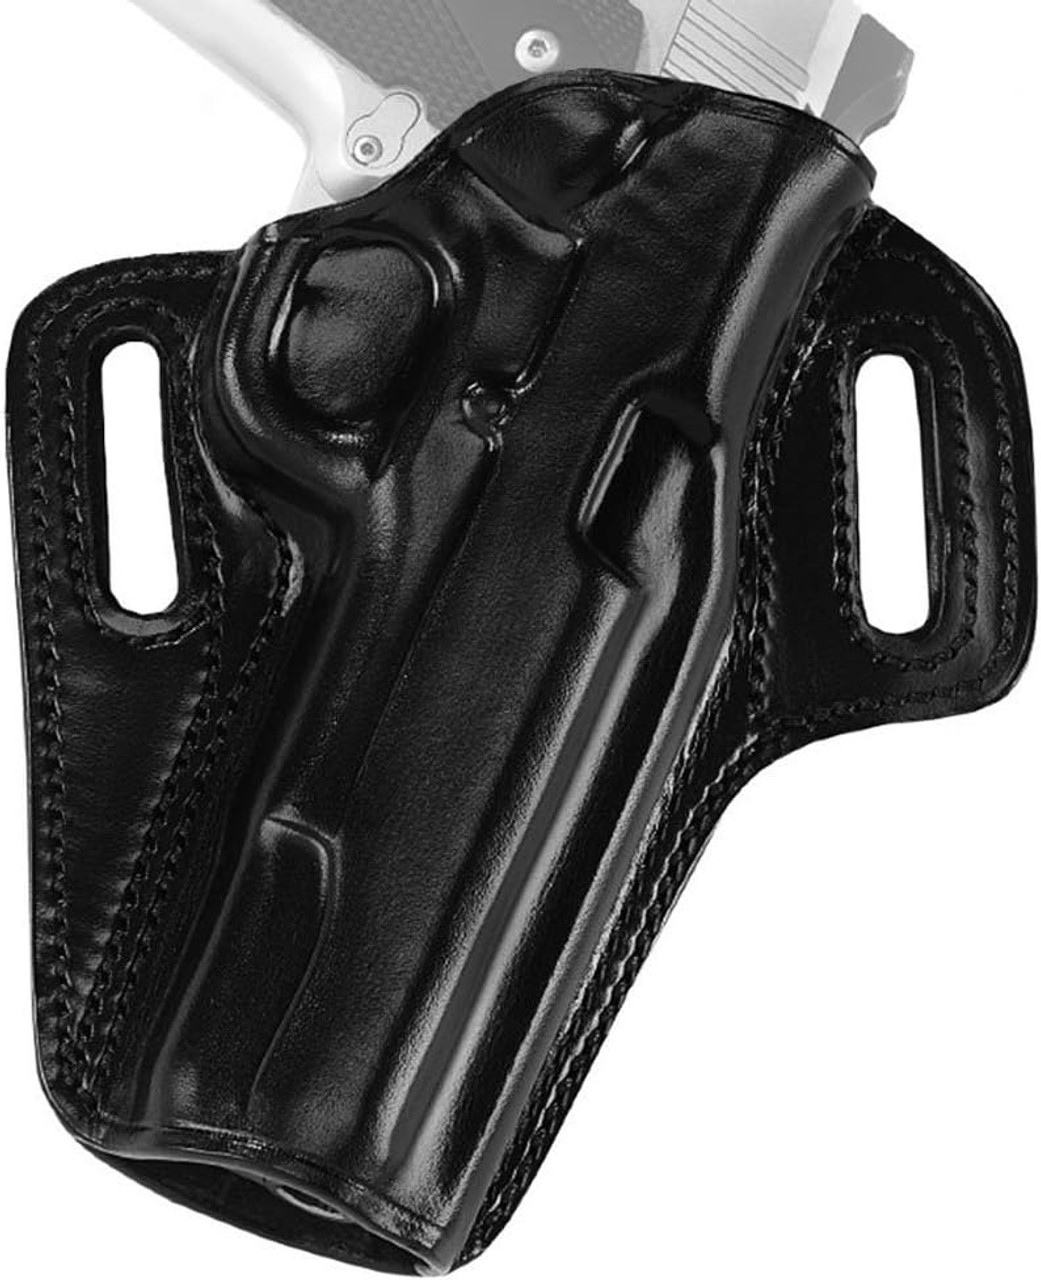 Galco Concealable Belt Holster Colt Kimber 1911 5" Black RH CON212B